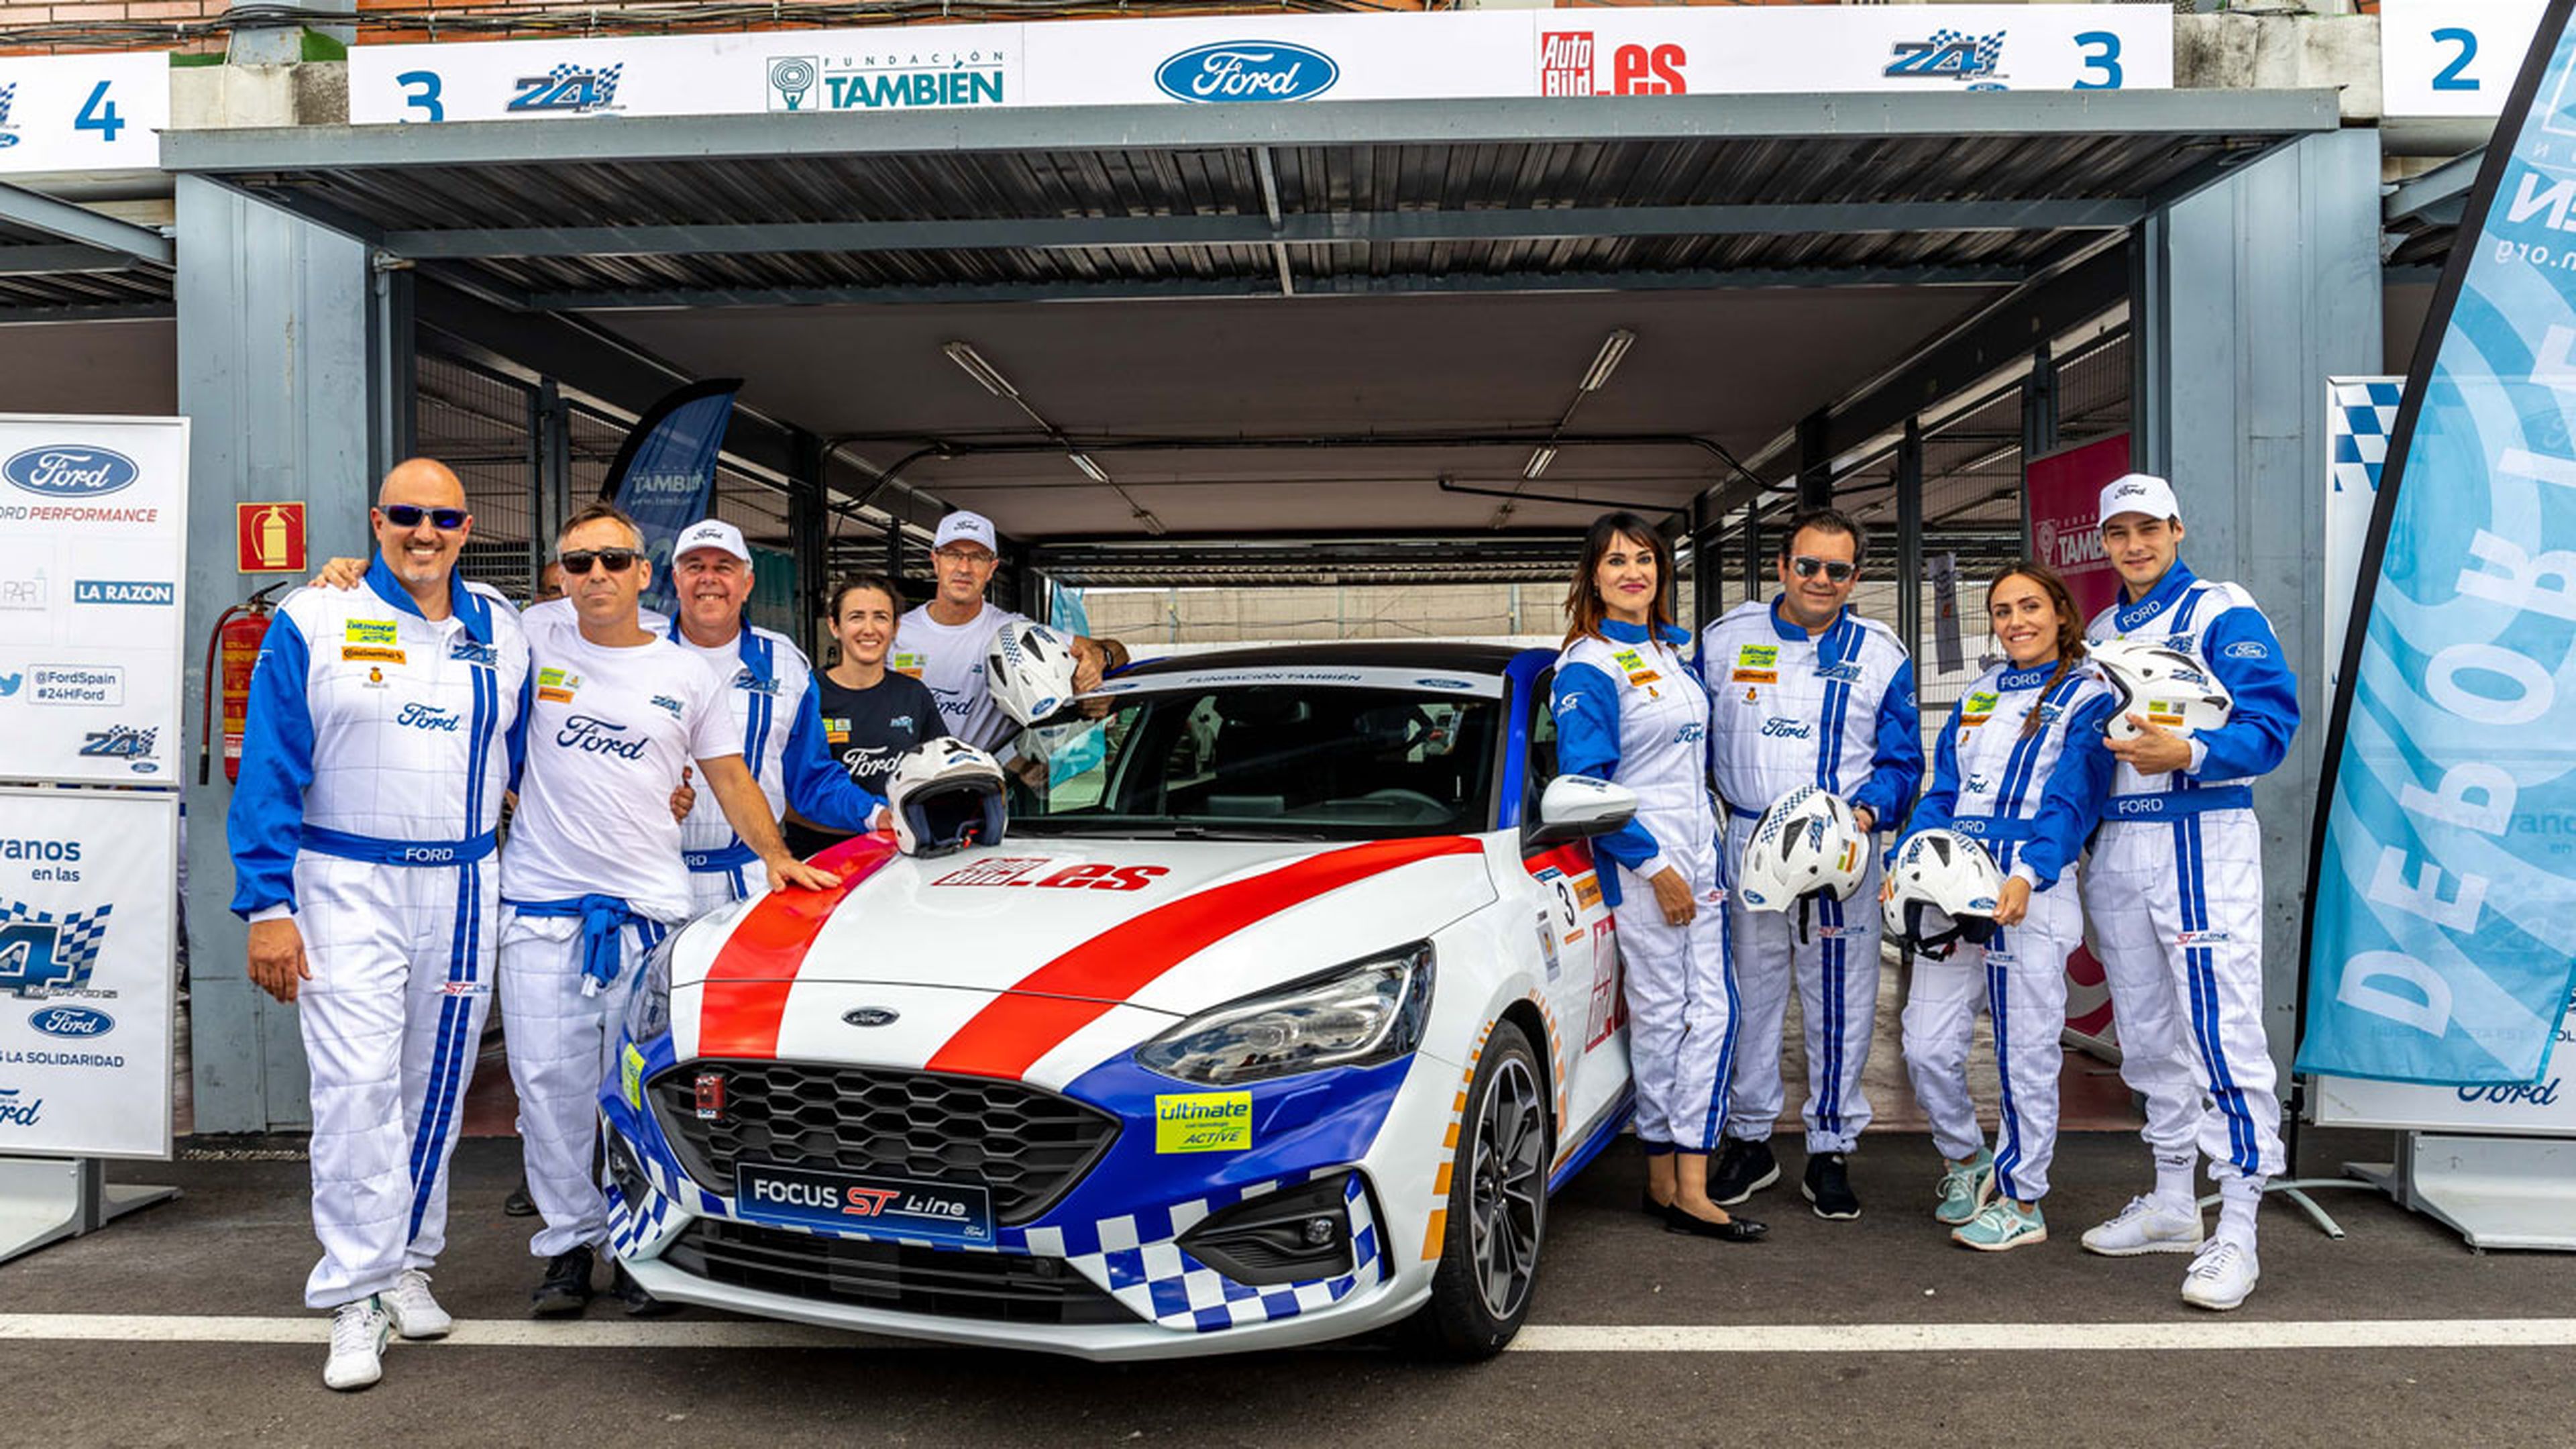 24H Ford 2019